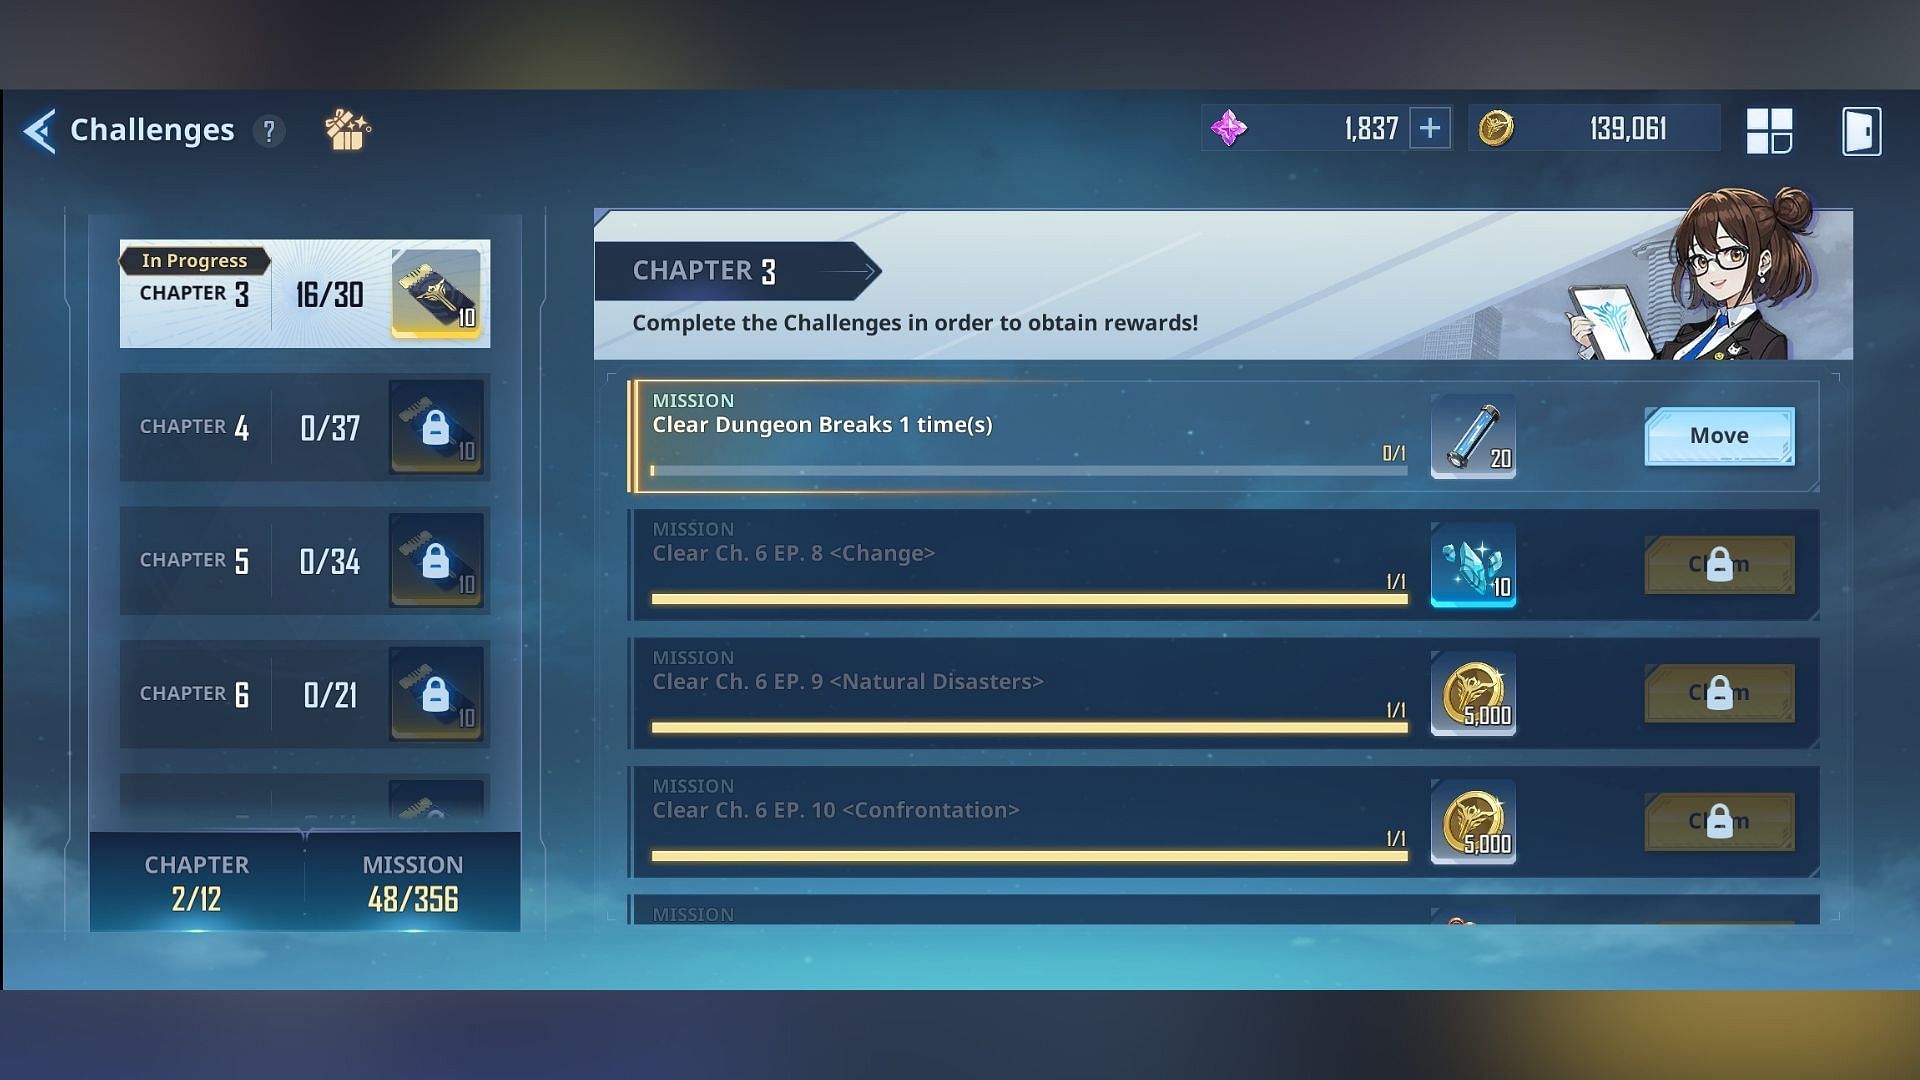 Clearing each chapter in Challenges grants 10 Custom Draw Tickets (Image via Netmarble)